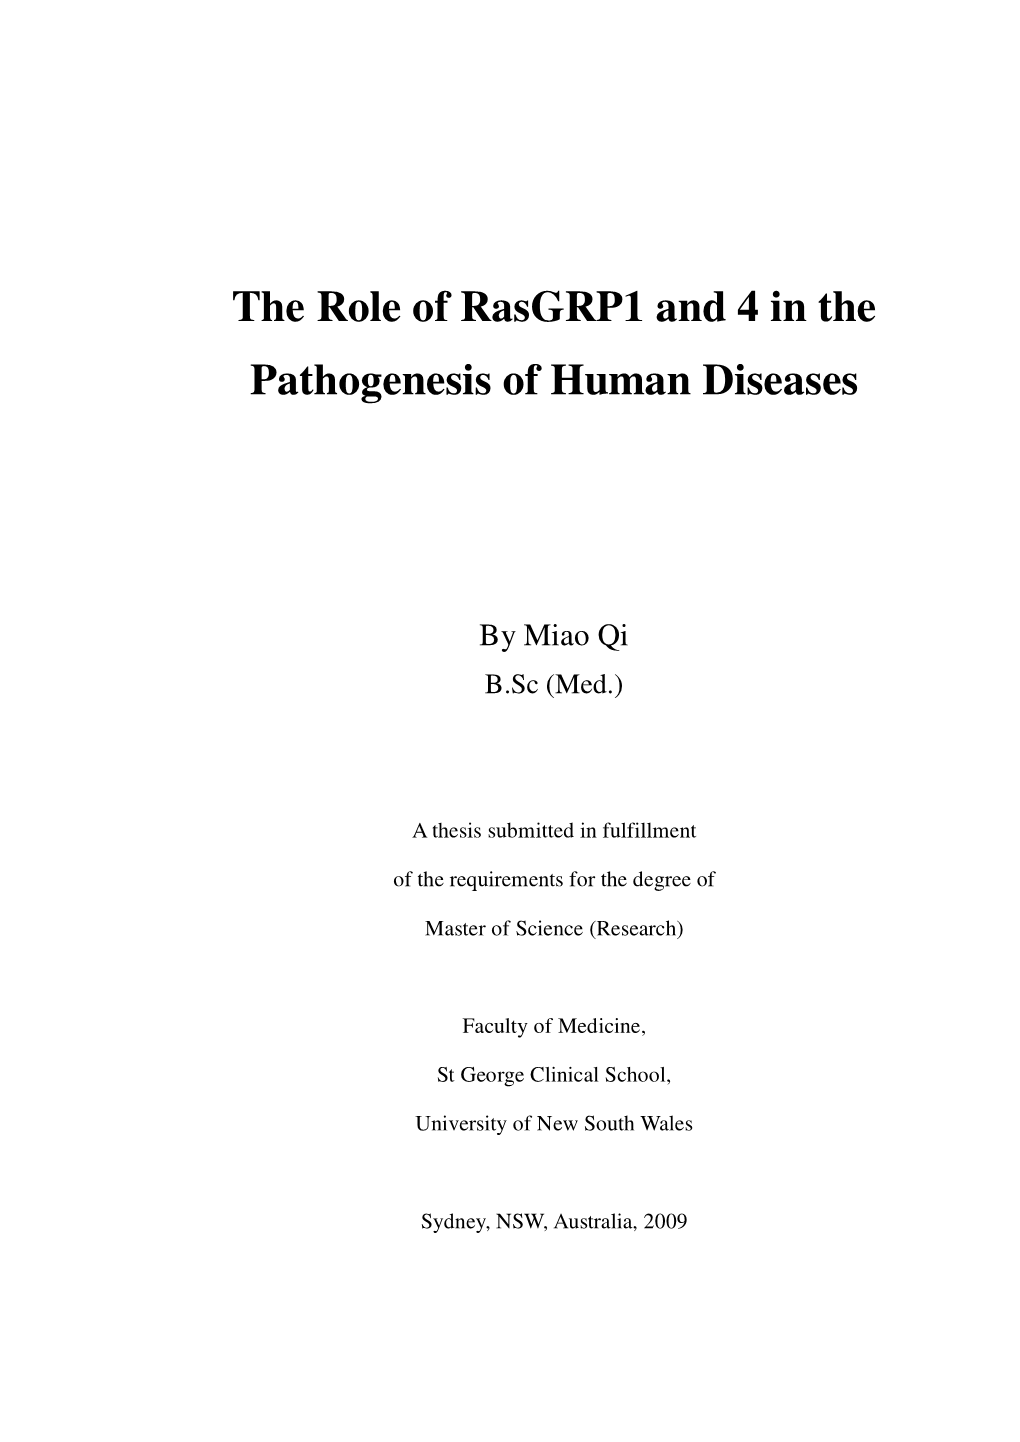 The Role of Rasgrp1 and 4 in the Pathogenesis of Human Diseases